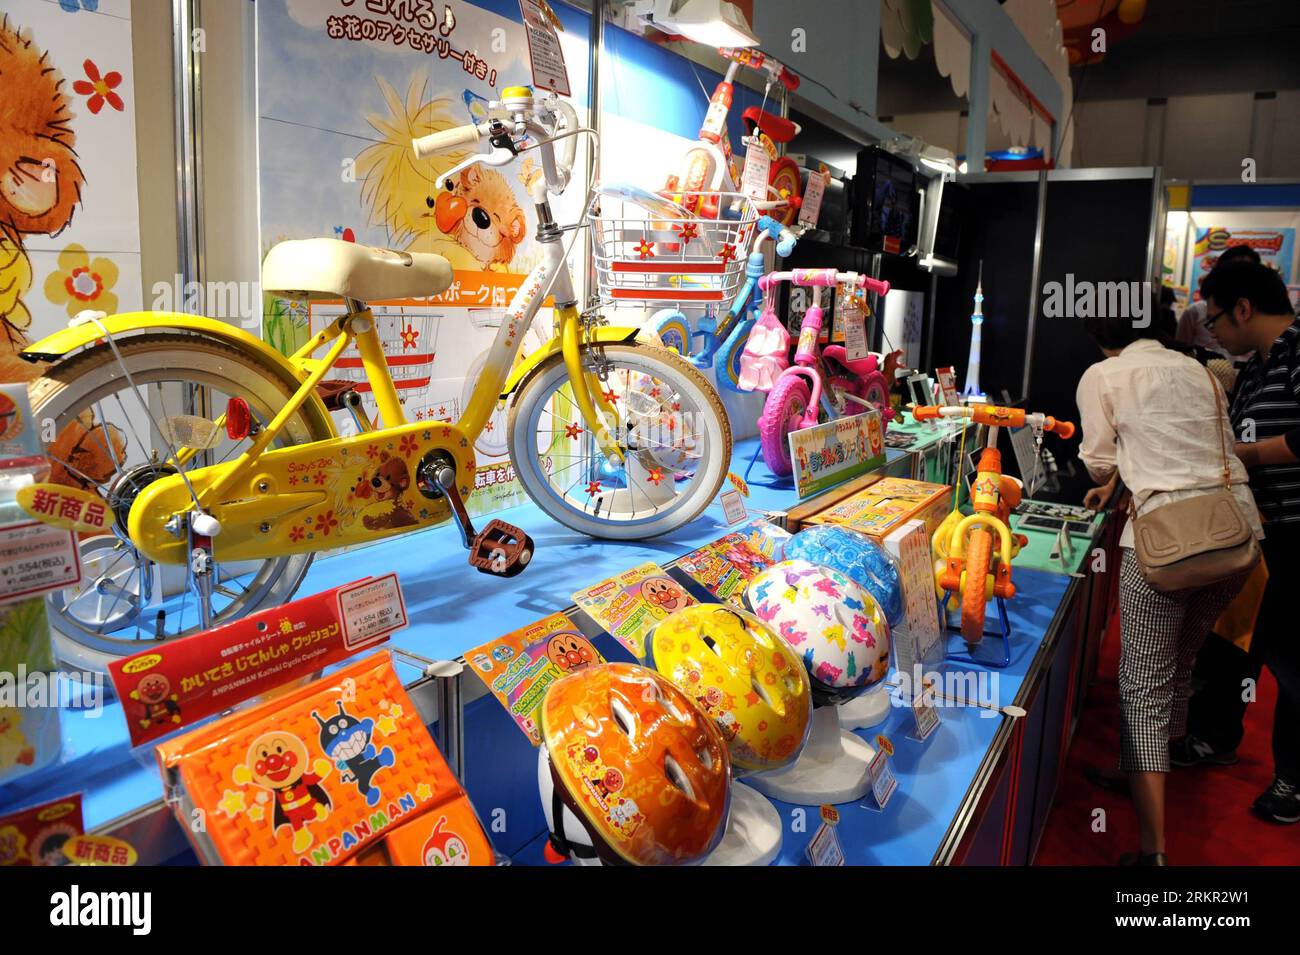 Bildnummer: 58105978  Datum: 14.06.2012  Copyright: imago/Xinhua (120614) -- TOKYO, June 14, 2012 (Xinhua) --Visitors look at the bikes and related products designed for children at the International Toy Show in Tokyo, Japan, June 14, 2012. The International Toy Show kicked off here on Thursday, showcasing a total of about 35,000 products by 143 toy manufacturers. (Xinhua/Ma Ping) (srb) JAPAN-TOKYO-INTERNATIONAL TOY SHOW PUBLICATIONxNOTxINxCHN Wirtschaft Messe Spielzeugmesse Spielzeug x2x xst 2012 quer o0 Fahrrad Kinderfahrrad     58105978 Date 14 06 2012 Copyright Imago XINHUA  Tokyo June 14 Stock Photo